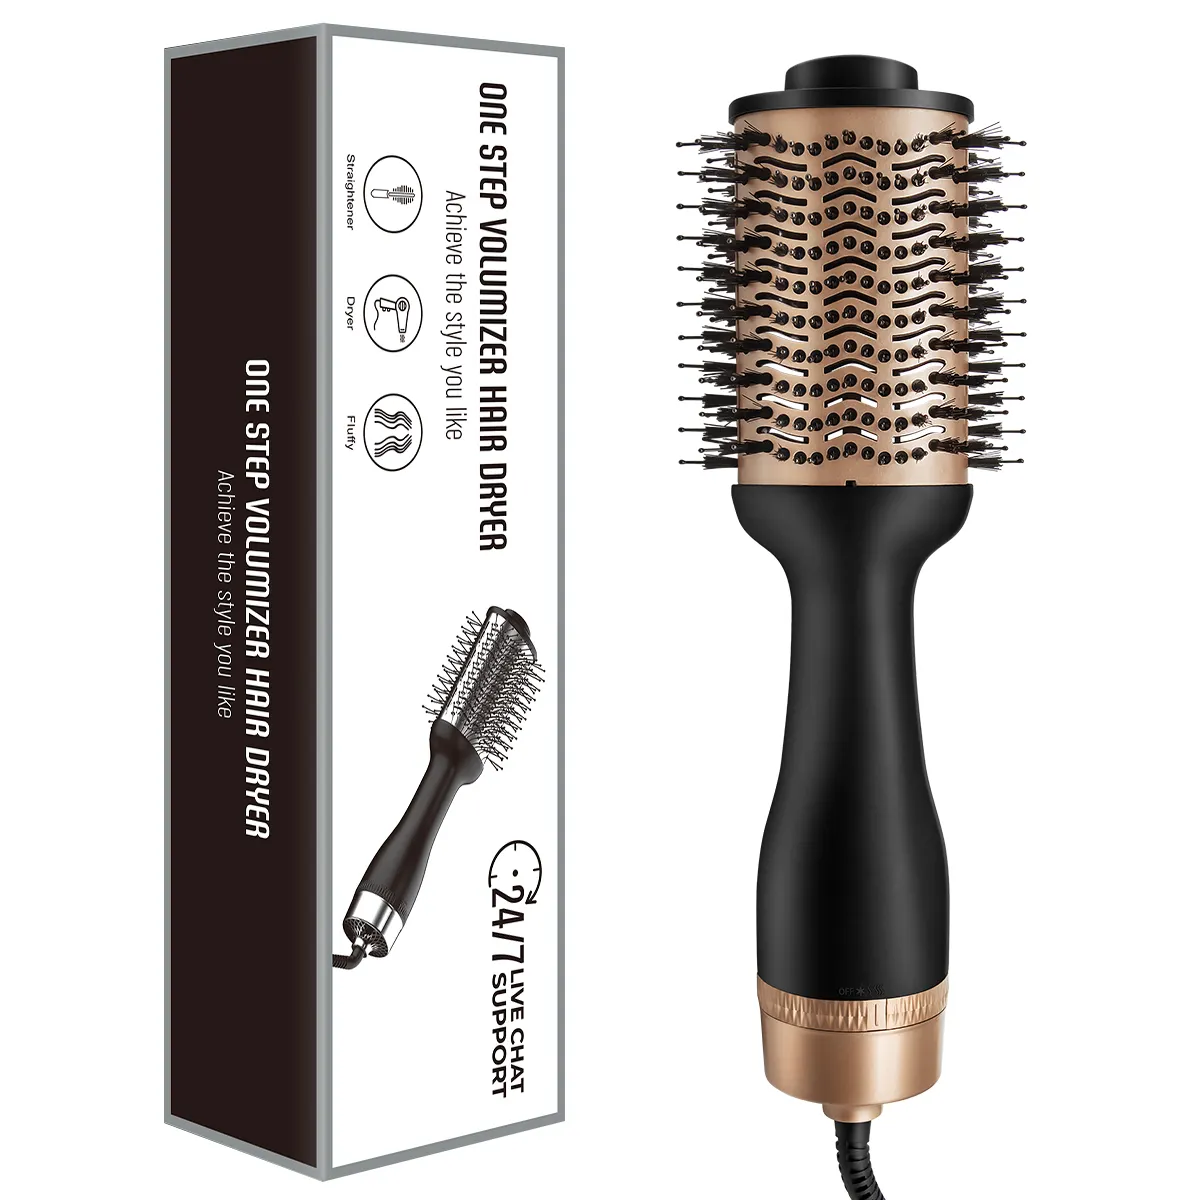 1200w Hot Air Blow Dryer Brush Professional 2 In 1 Straightener Comb Electric Blow Dryer Rotating Hair Brush Roller Styler